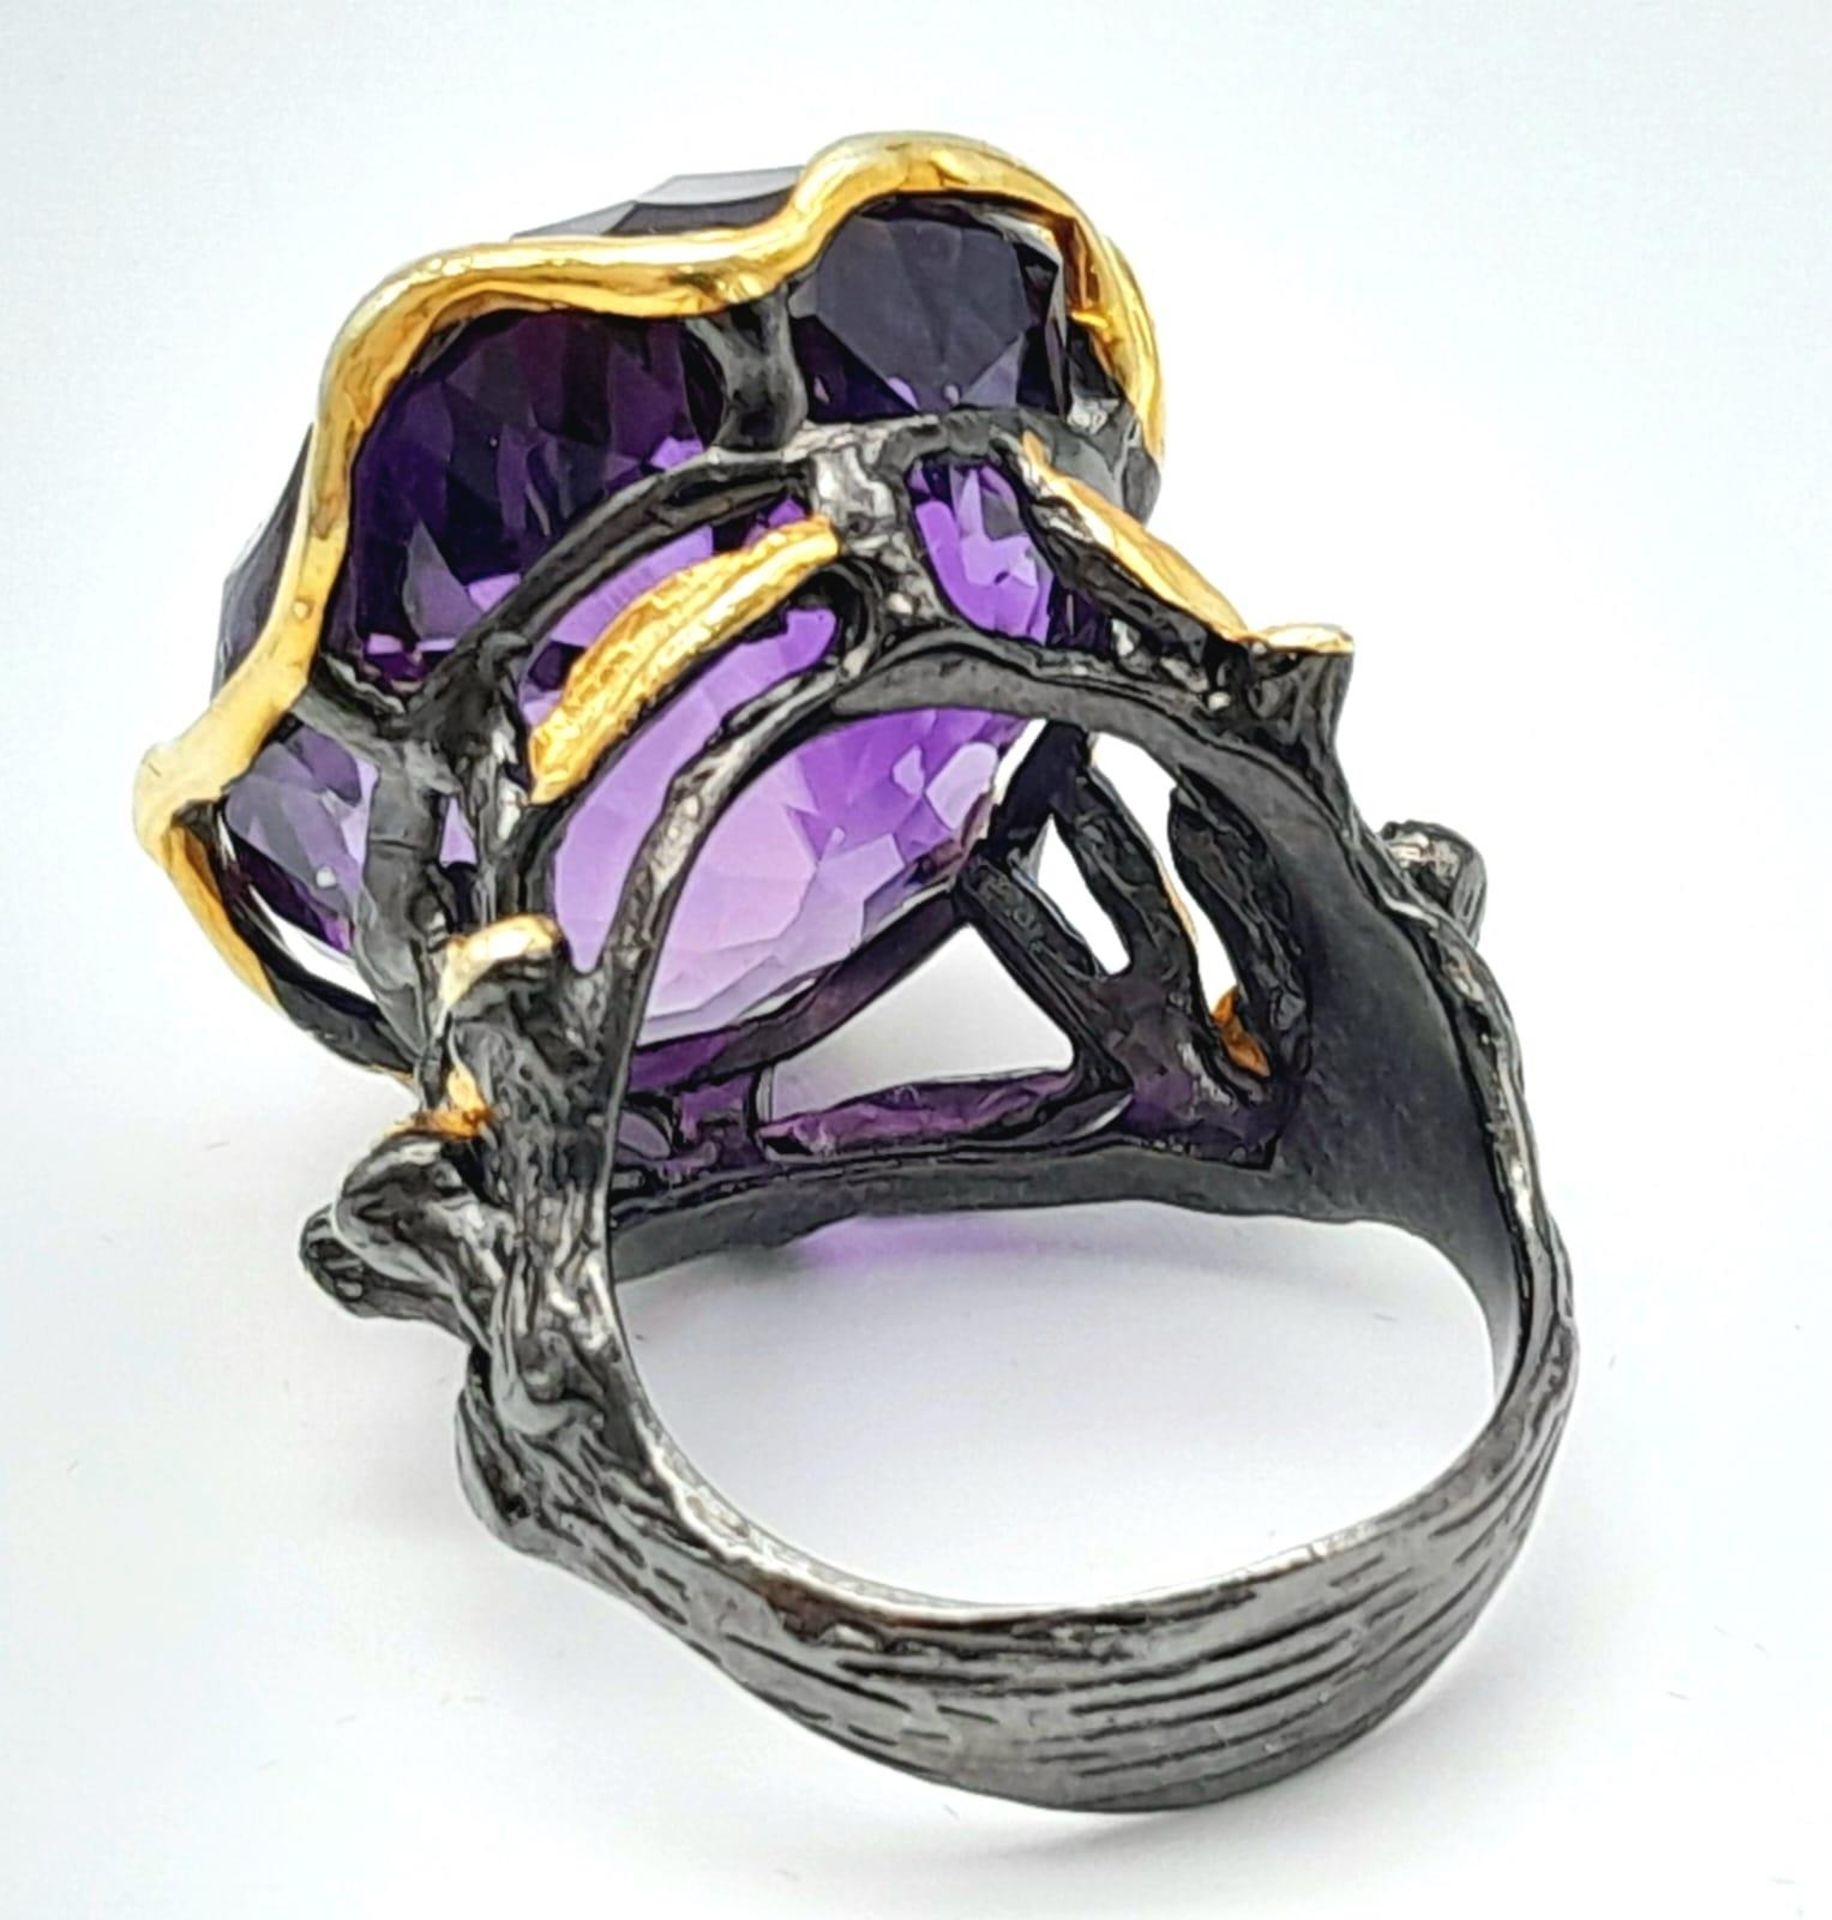 A glorious, vintage sterling silver ring with 18 K yellow gold accents and an impressive amethyst - Image 3 of 5